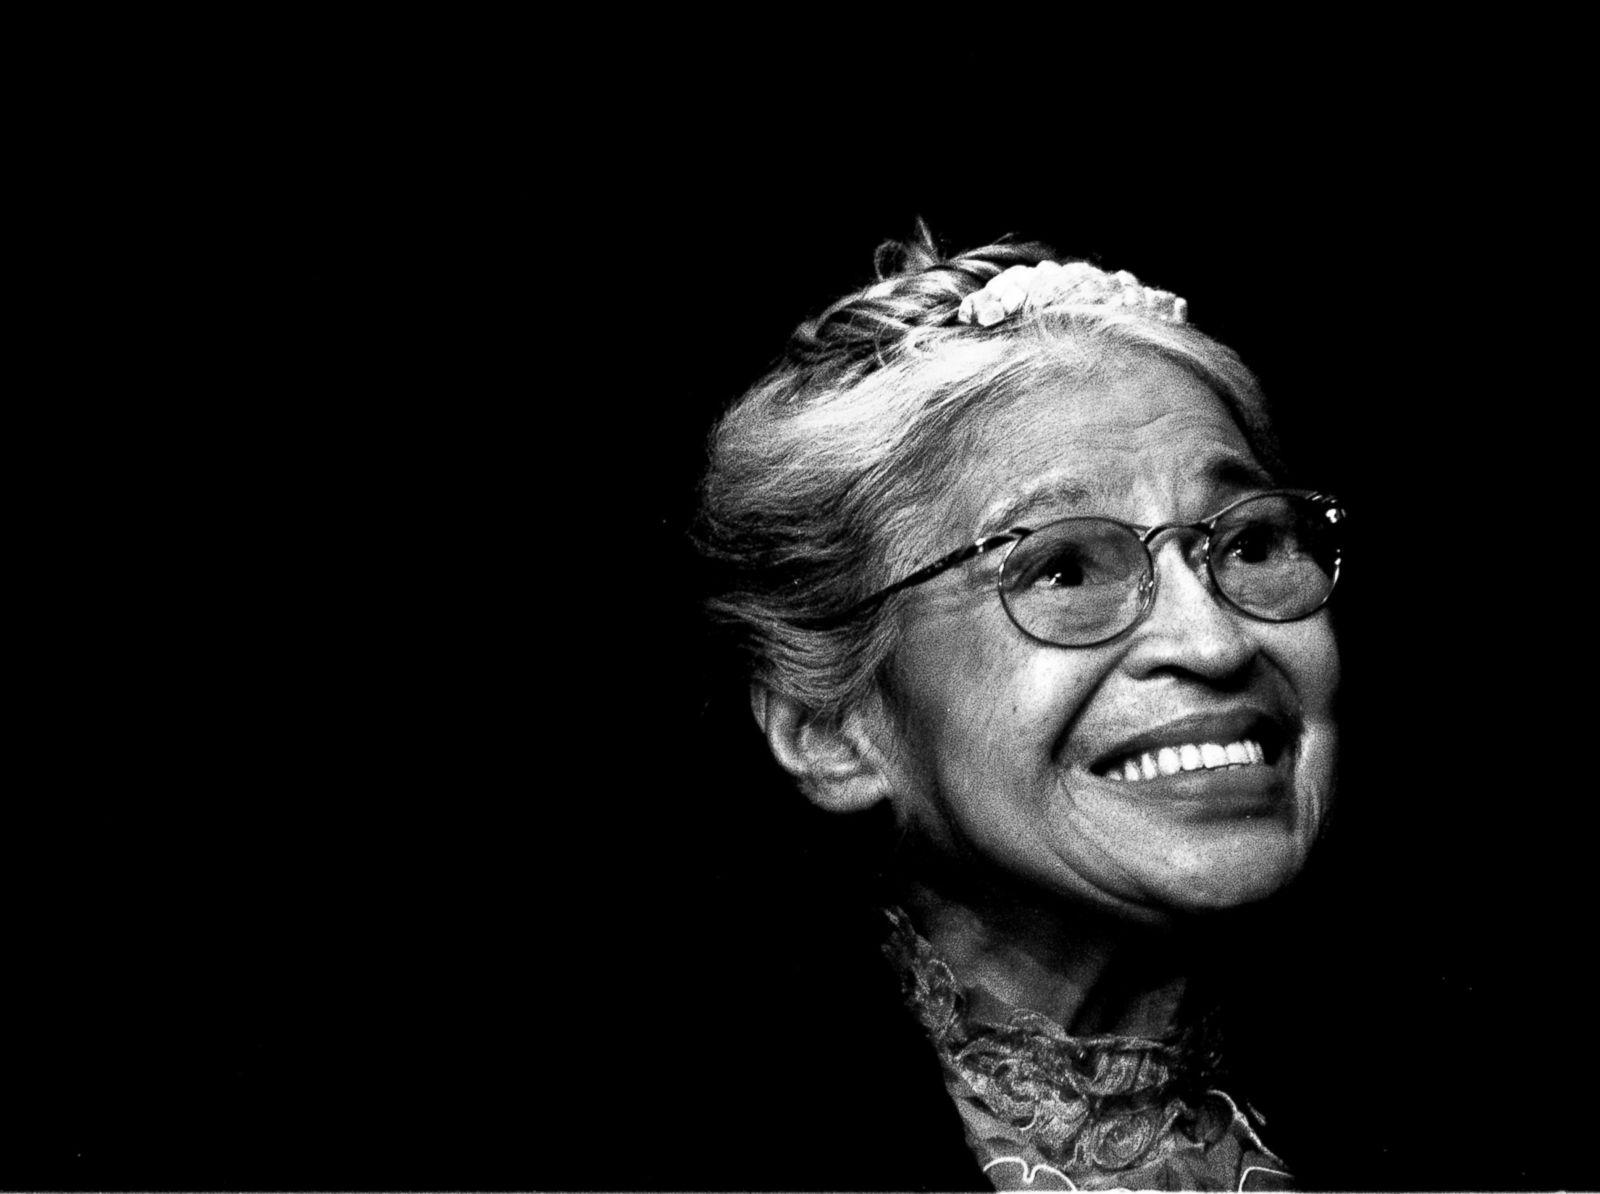 60th Anniversary Of Rosa Parks Historical Refusal To Give Up Her